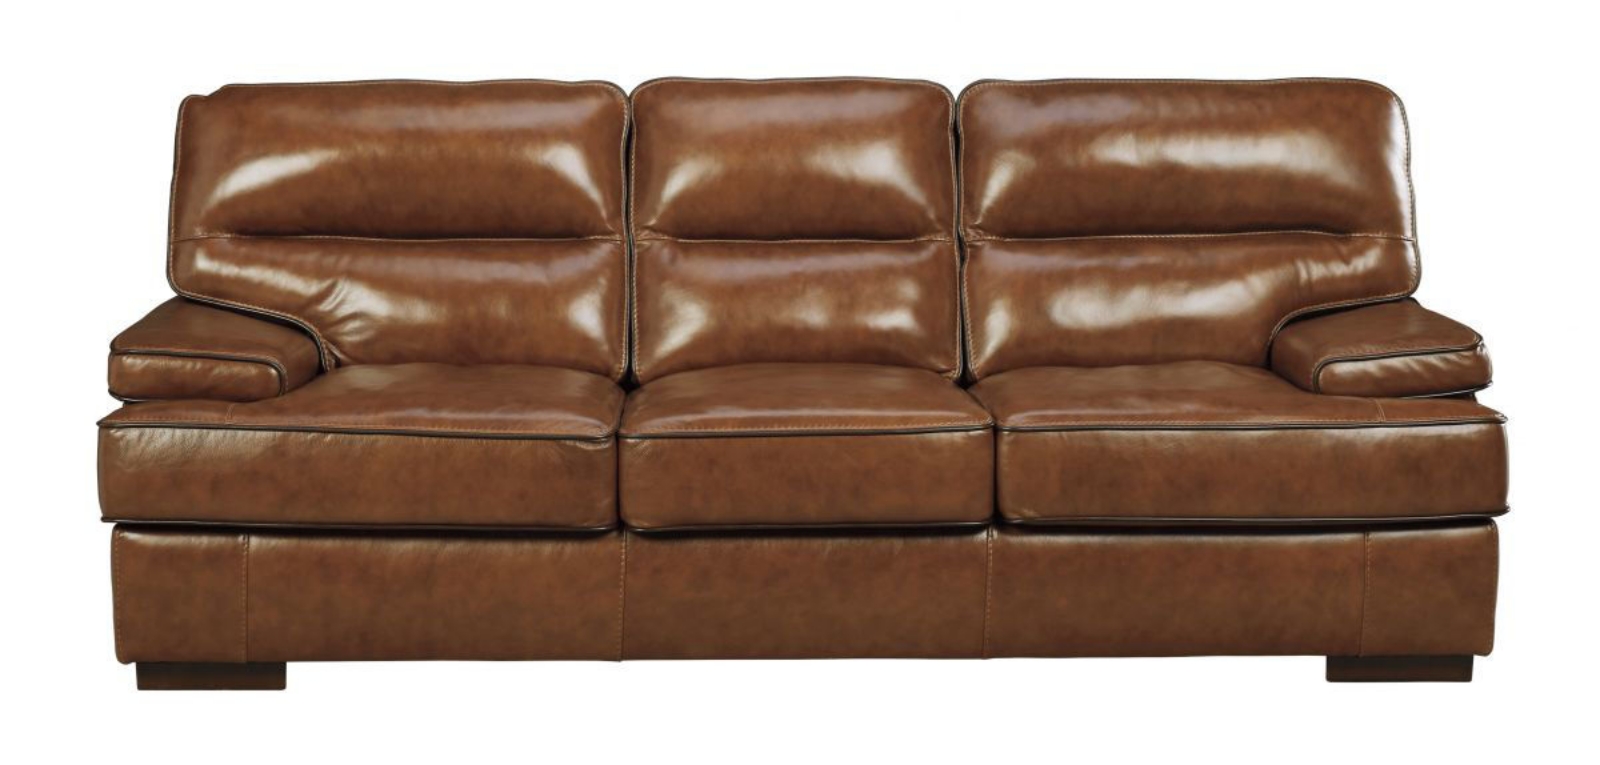 Picture of Palner Sofa